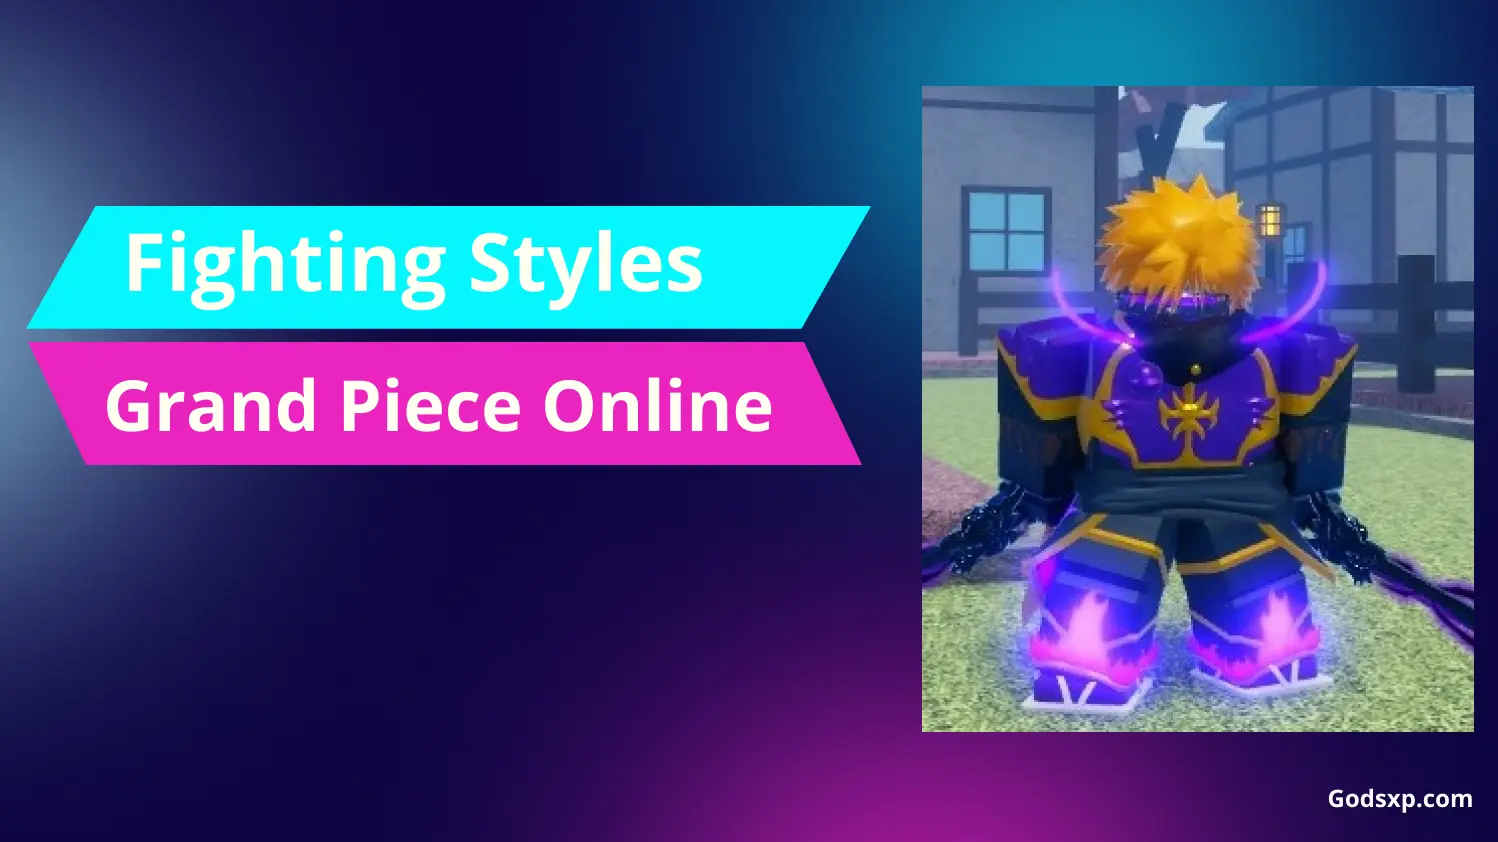 ALL NEW WORKING CODES FOR GRAND PIECE ONLINE IN 2023! ROBLOX GPO CODES 